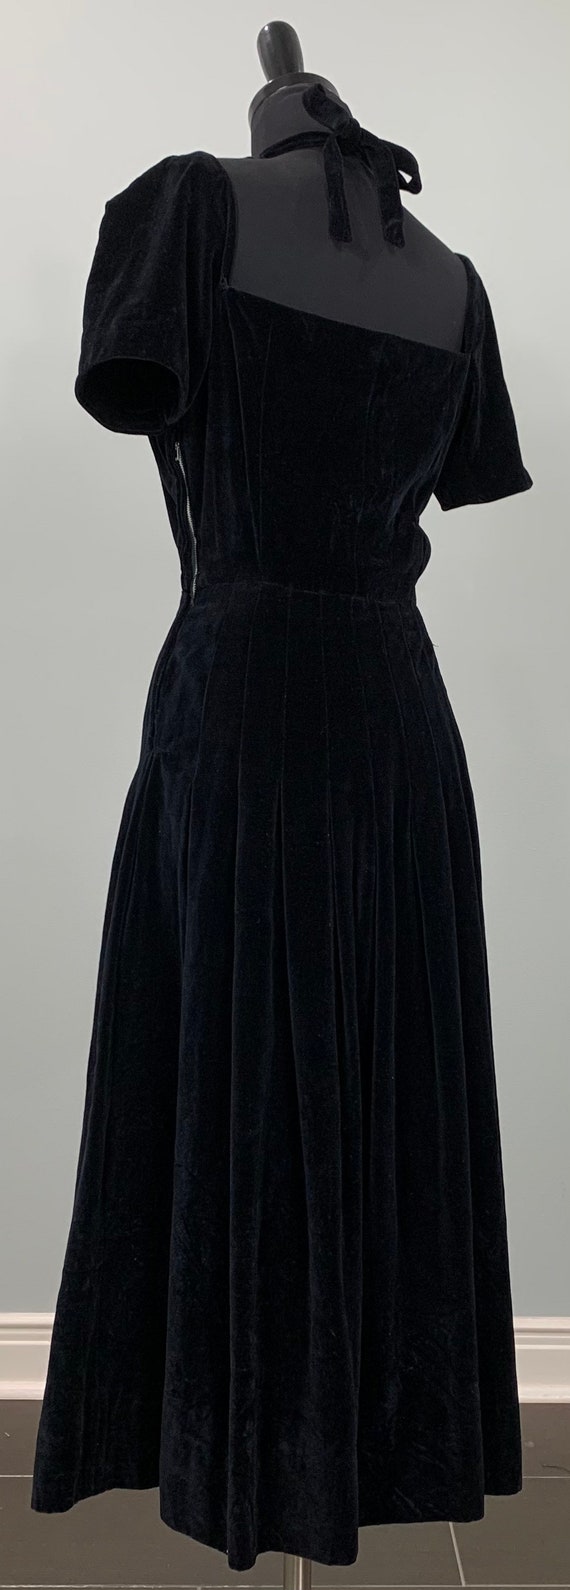 Black Velvet Fit and Flare Party Dress - Size 0/2… - image 8